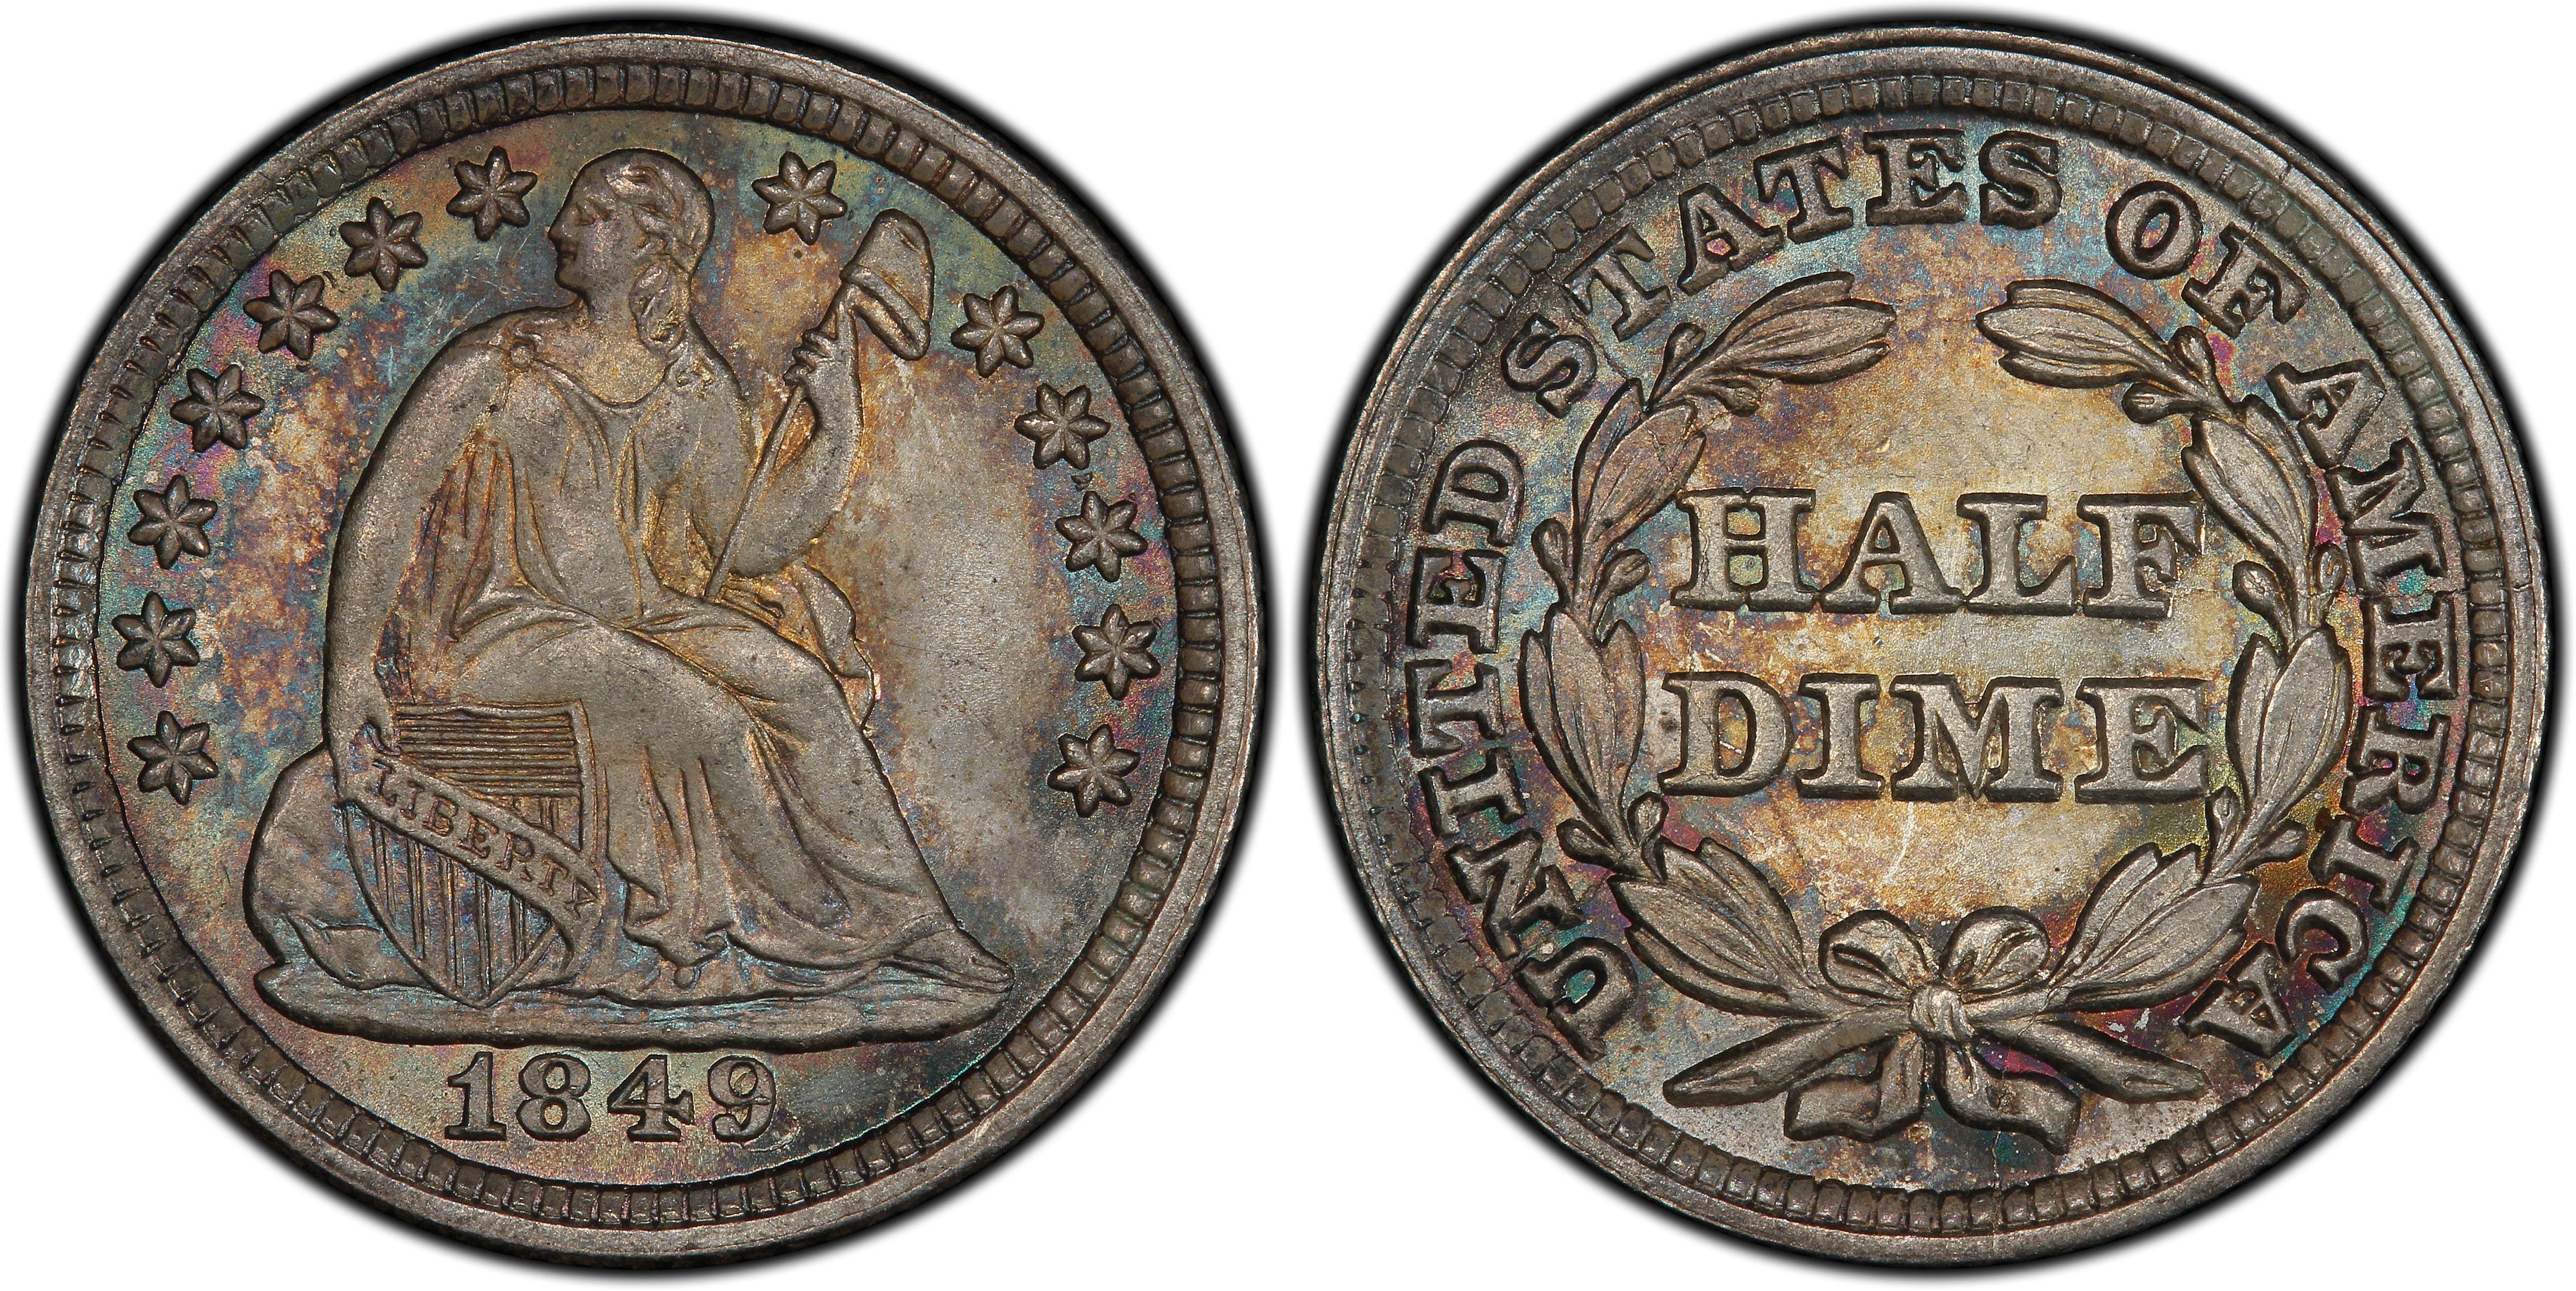 1849/6 H10C (Regular Strike) Liberty Seated Half Dime - PCGS CoinFacts